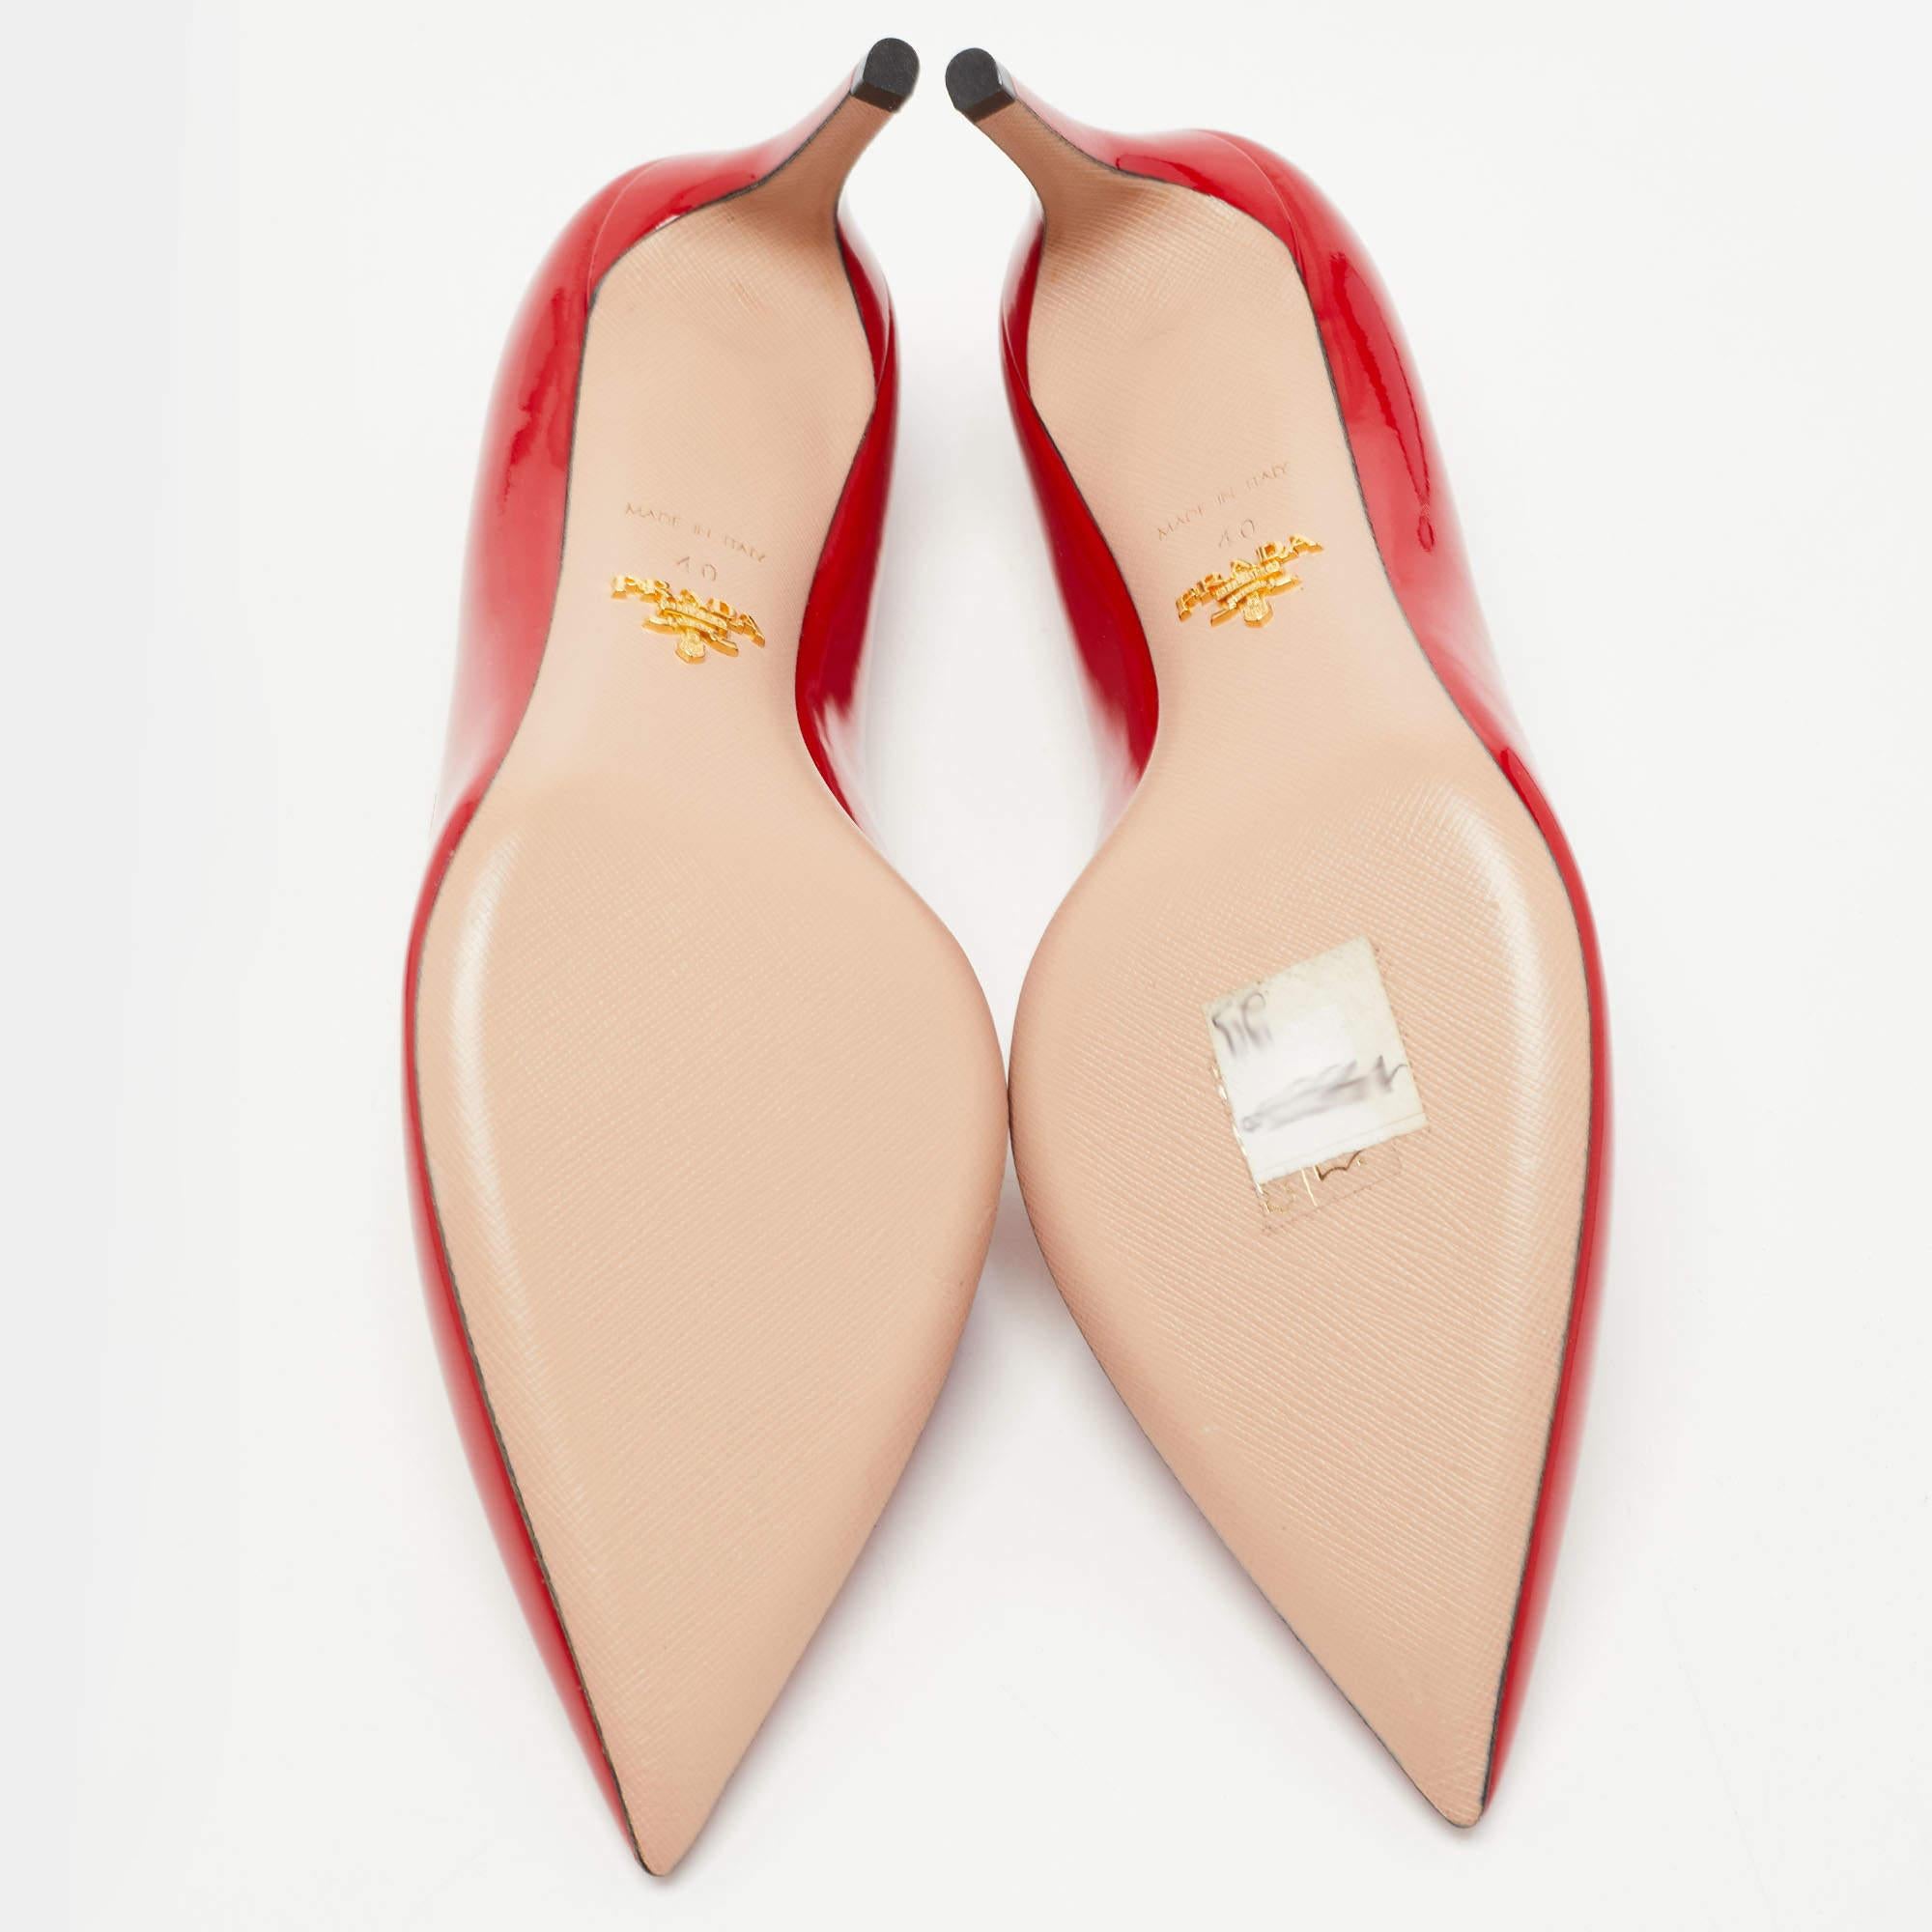 Prada Red Patent Leather Pointed Toe Pumps Size 40 4